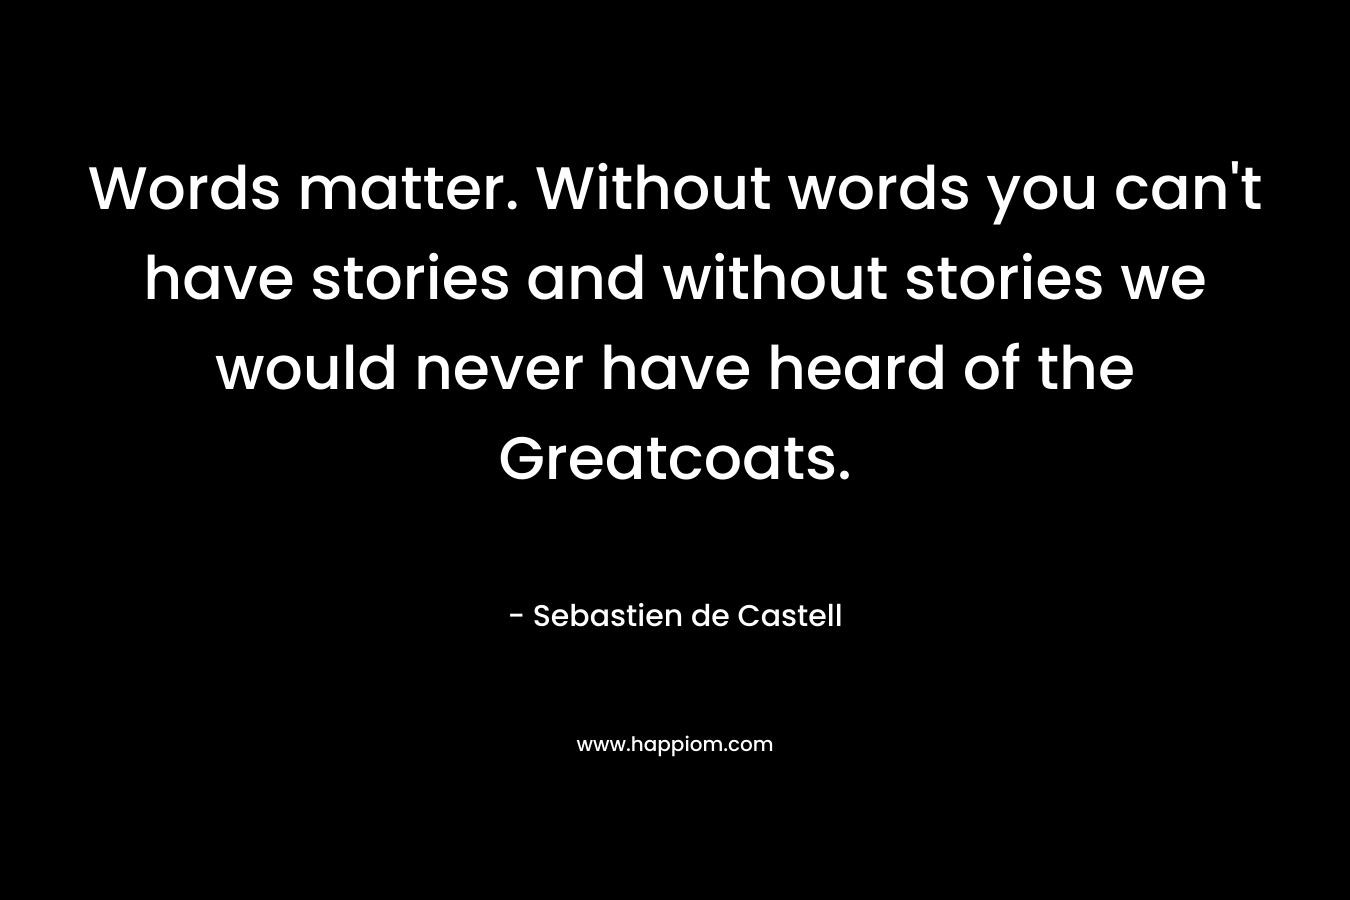 Words matter. Without words you can't have stories and without stories we would never have heard of the Greatcoats.